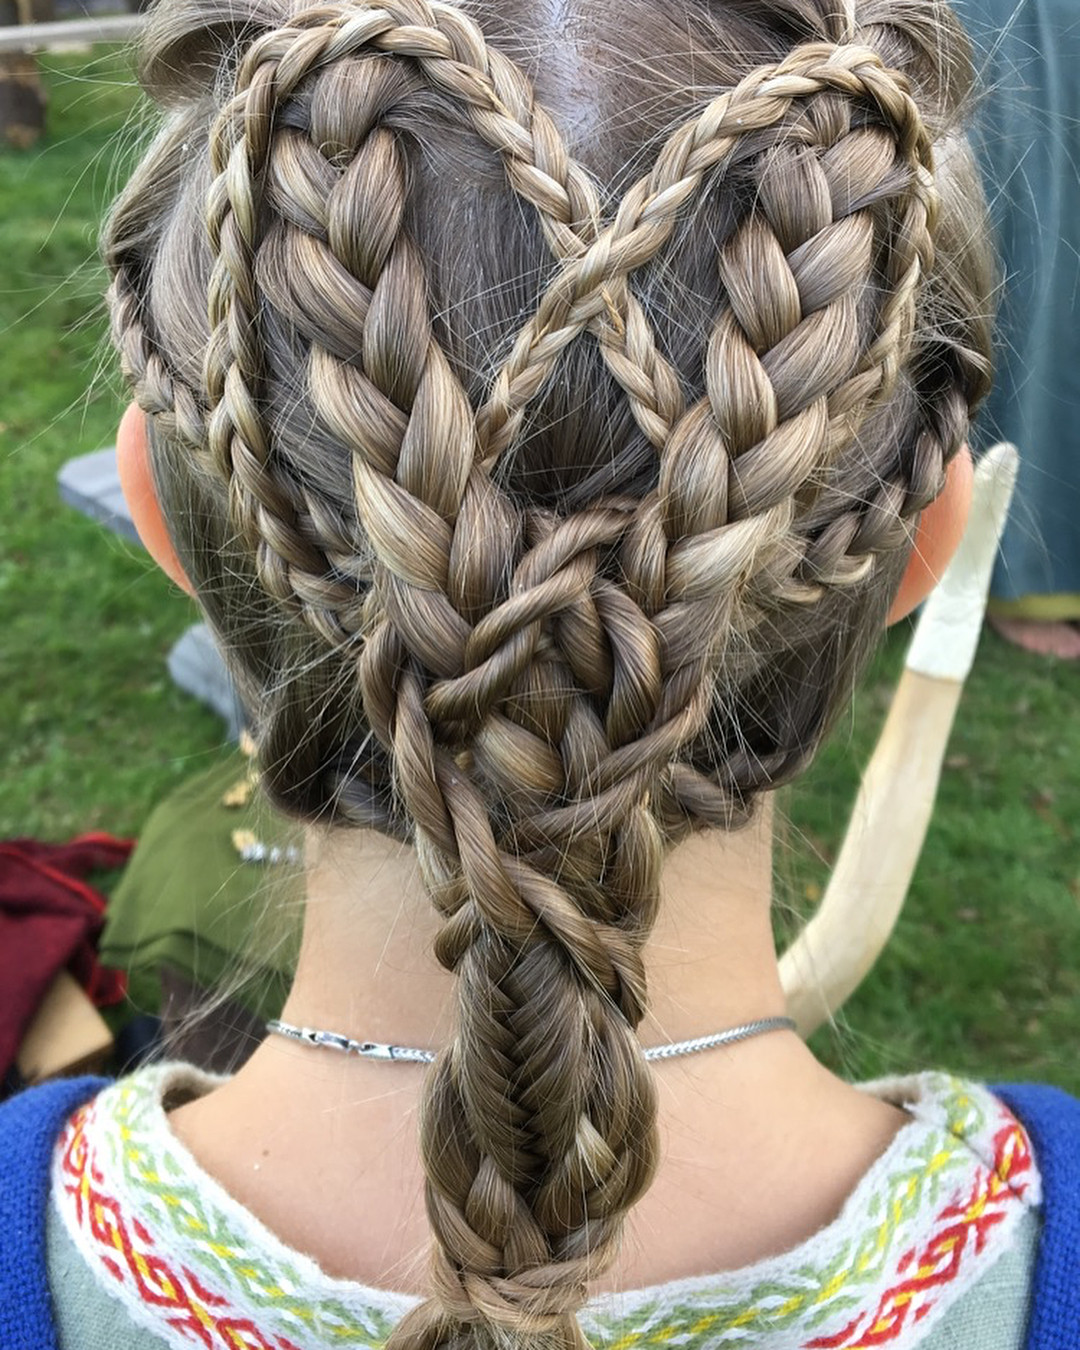 68 Medieval Hairstyles You Need To Try Right Now,womens medieval hairstyles,medieval hairstyles female short hair,medieval hairstyles female long hair,medieval scottish hairstyles